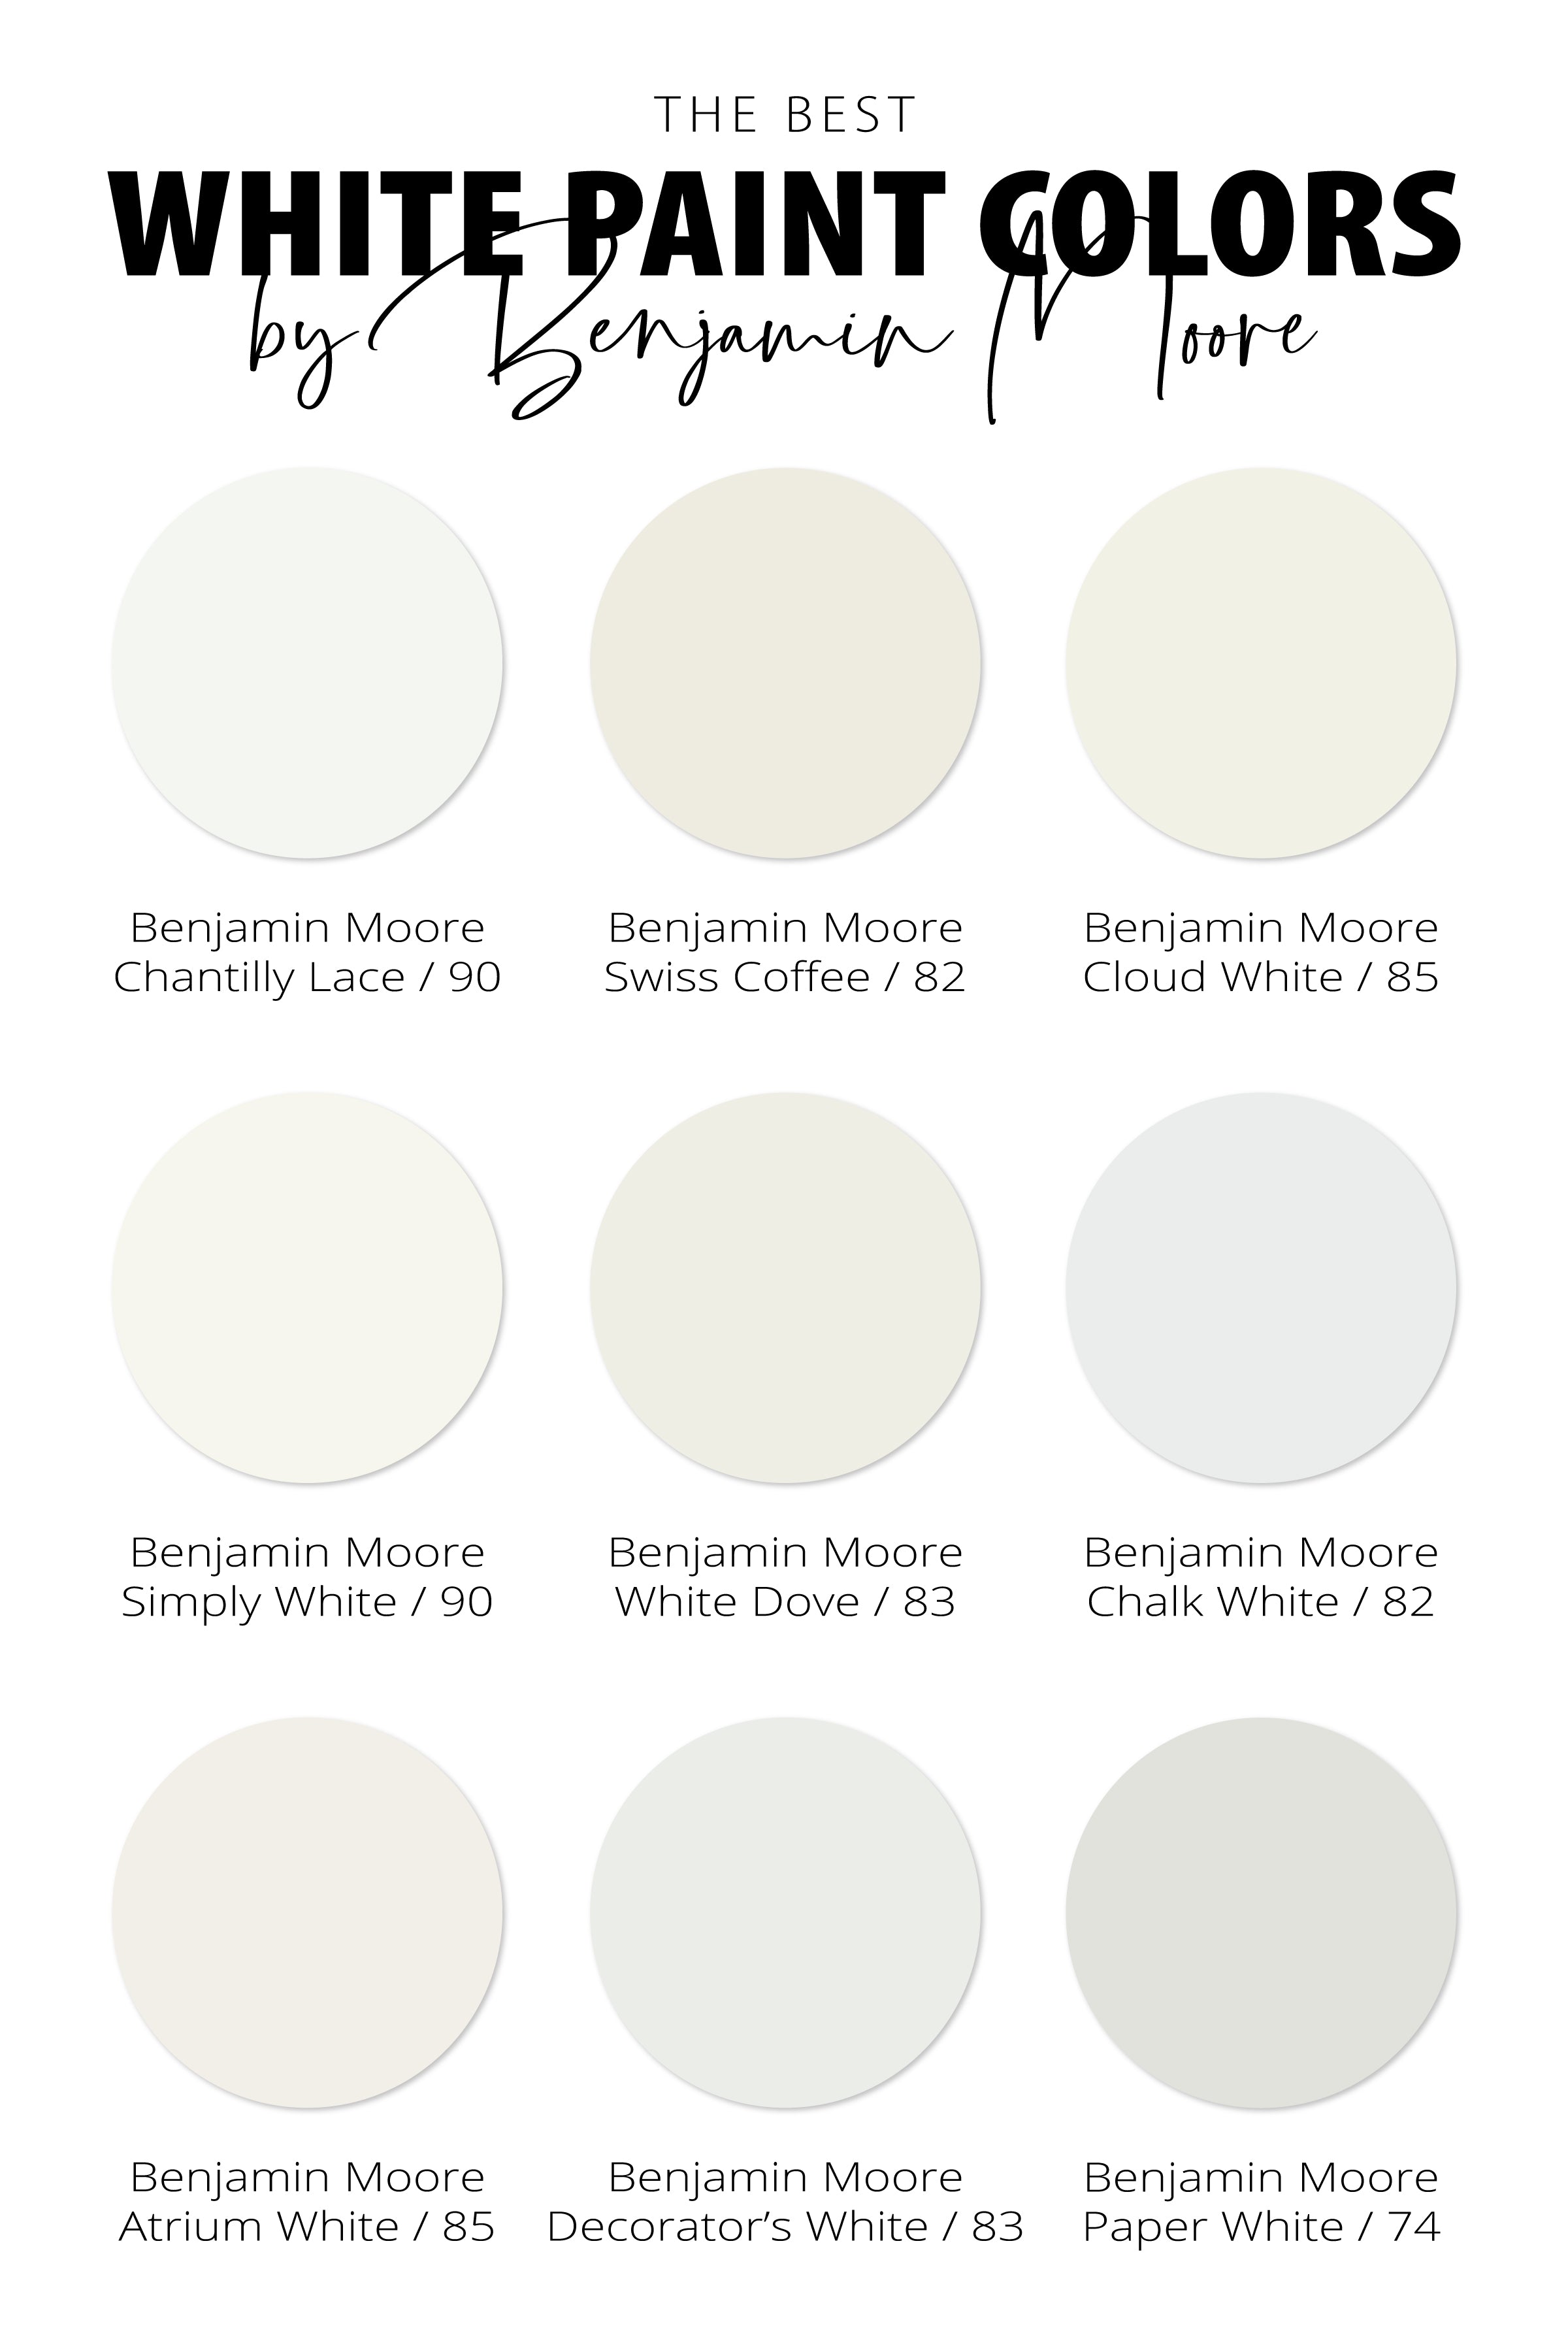 Best-White-Paint-Colors-by-Benjamin-Moore-with-Names-Colors-and-LRV-Values